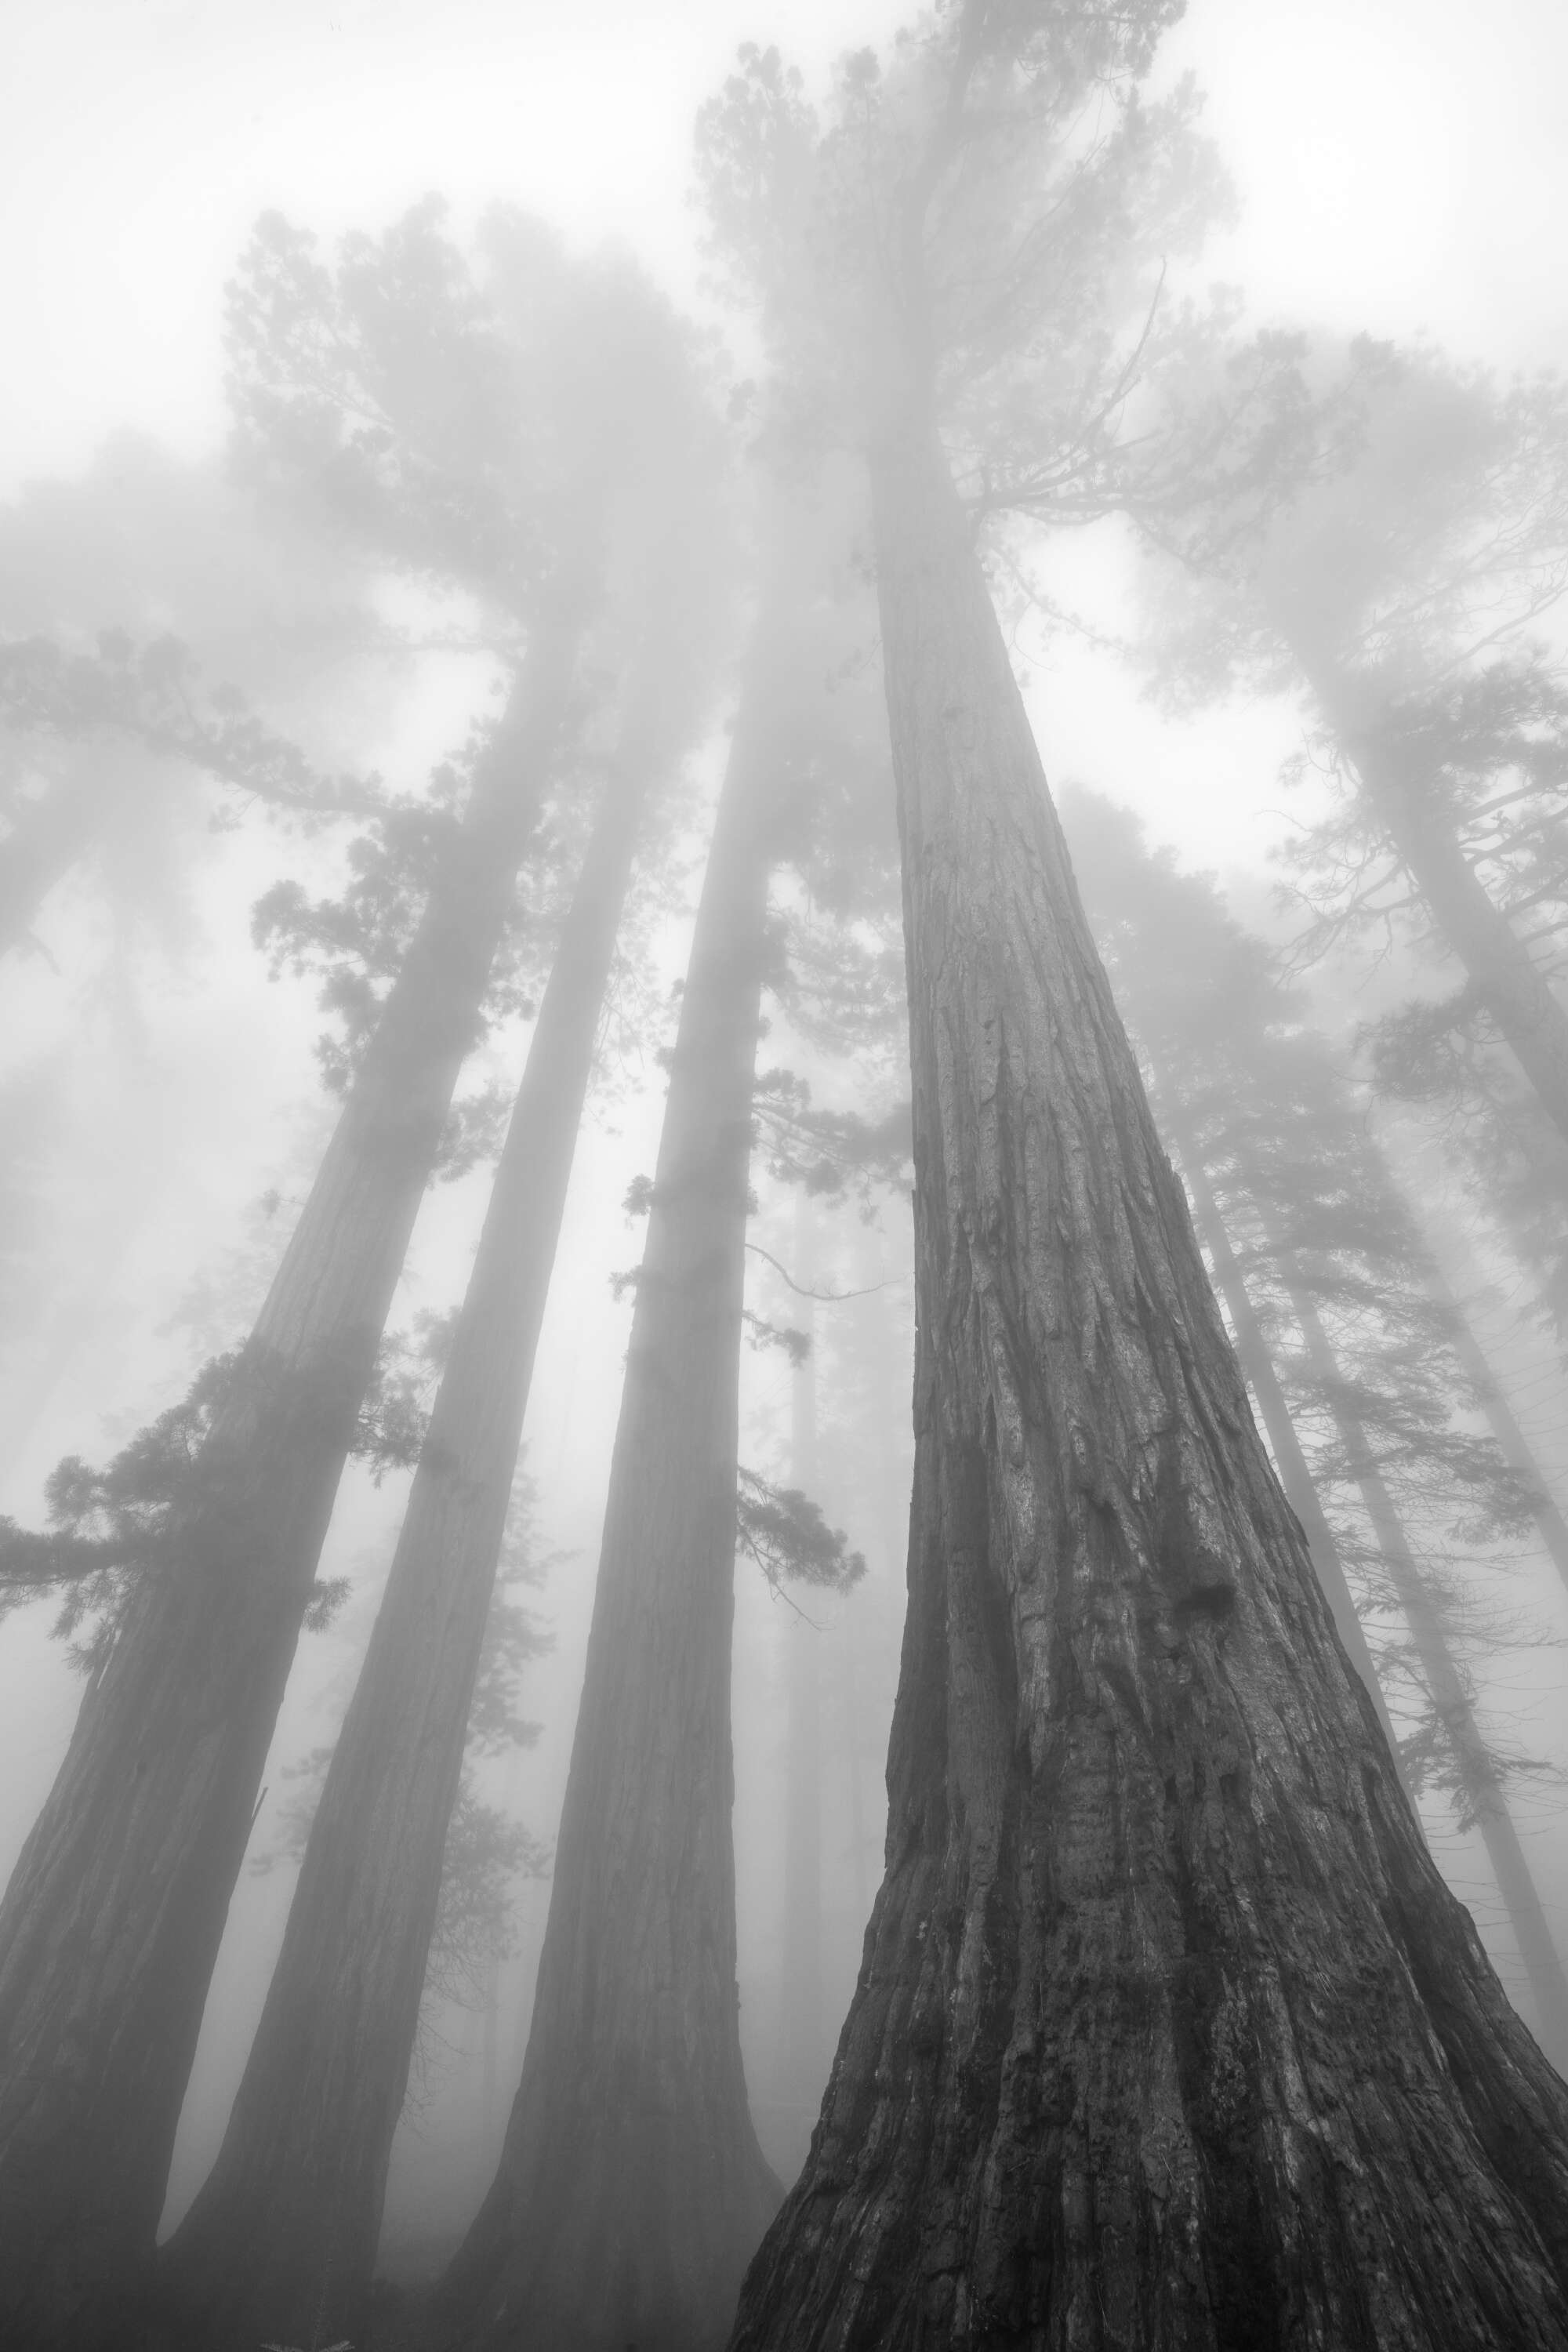 Giant Sequoias In Mist by Paul Gallagher aspect2i